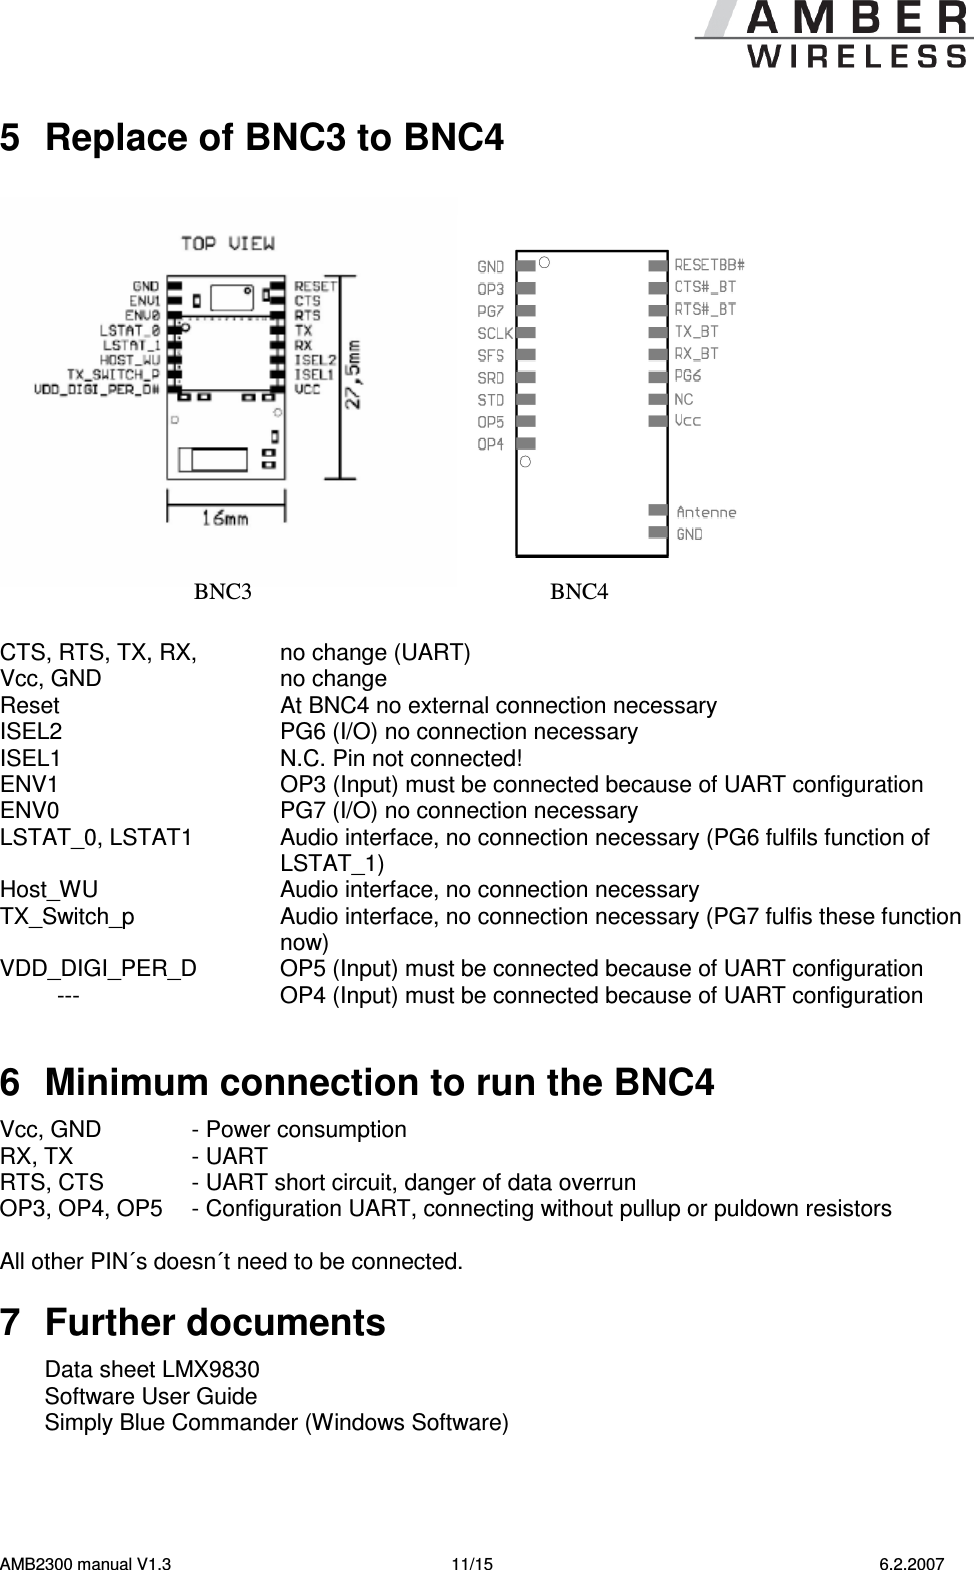   AMB2300 manual V1.3  11/15  6.2.2007 5  Replace of BNC3 to BNC4     CTS, RTS, TX, RX,    no change (UART) Vcc, GND     no change Reset    At BNC4 no external connection necessary ISEL2    PG6 (I/O) no connection necessary ISEL1    N.C. Pin not connected!          ENV1     OP3 (Input) must be connected because of UART configuration  ENV0    PG7 (I/O) no connection necessary LSTAT_0, LSTAT1    Audio interface, no connection necessary (PG6 fulfils function of LSTAT_1)    Host_WU    Audio interface, no connection necessary TX_Switch_p    Audio interface, no connection necessary (PG7 fulfis these function now)  VDD_DIGI_PER_D    OP5 (Input) must be connected because of UART configuration          ---    OP4 (Input) must be connected because of UART configuration     6  Minimum connection to run the BNC4 Vcc, GND   - Power consumption RX, TX  - UART RTS, CTS  - UART short circuit, danger of data overrun    OP3, OP4, OP5  - Configuration UART, connecting without pullup or puldown resistors  All other PIN´s doesn´t need to be connected.  7  Further documents Data sheet LMX9830 Software User Guide  Simply Blue Commander (Windows Software) BNC3 BNC4 